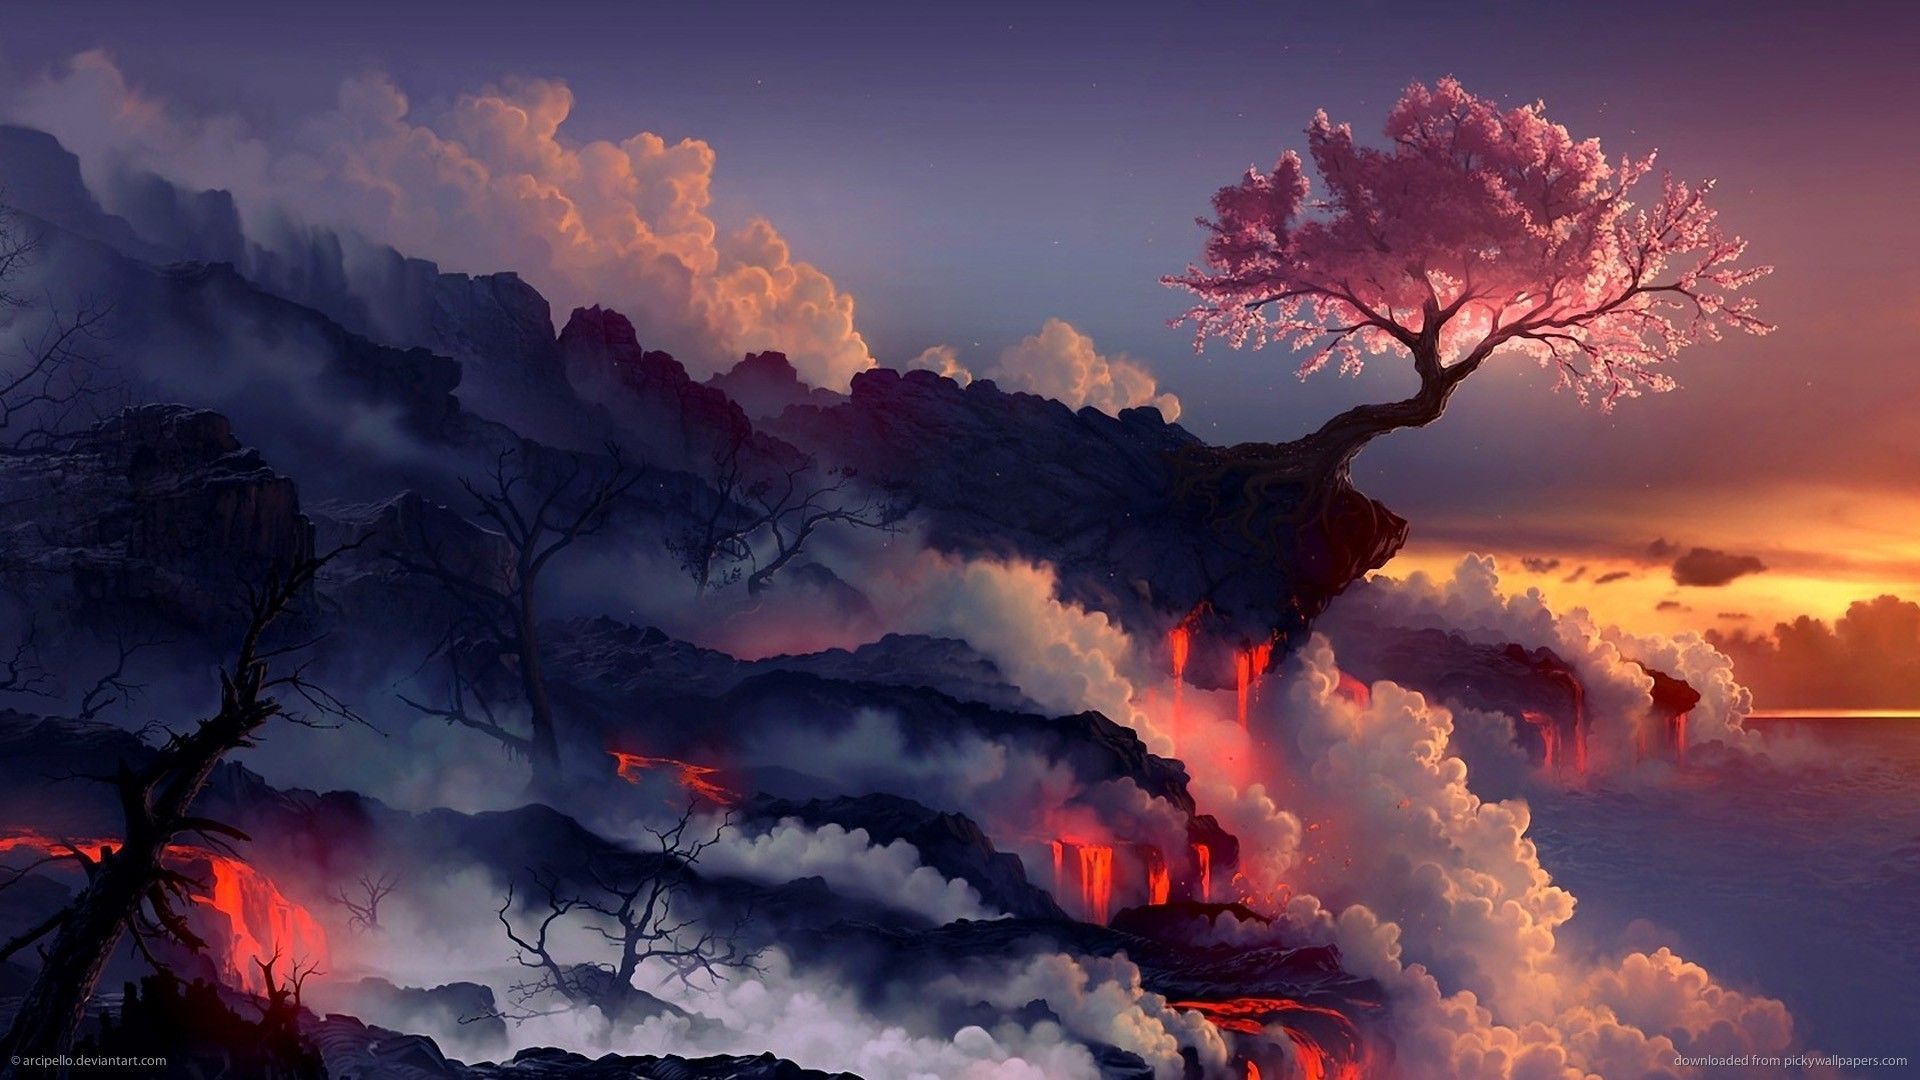 Download 1920x1080 Scorched Earth Wallpaper